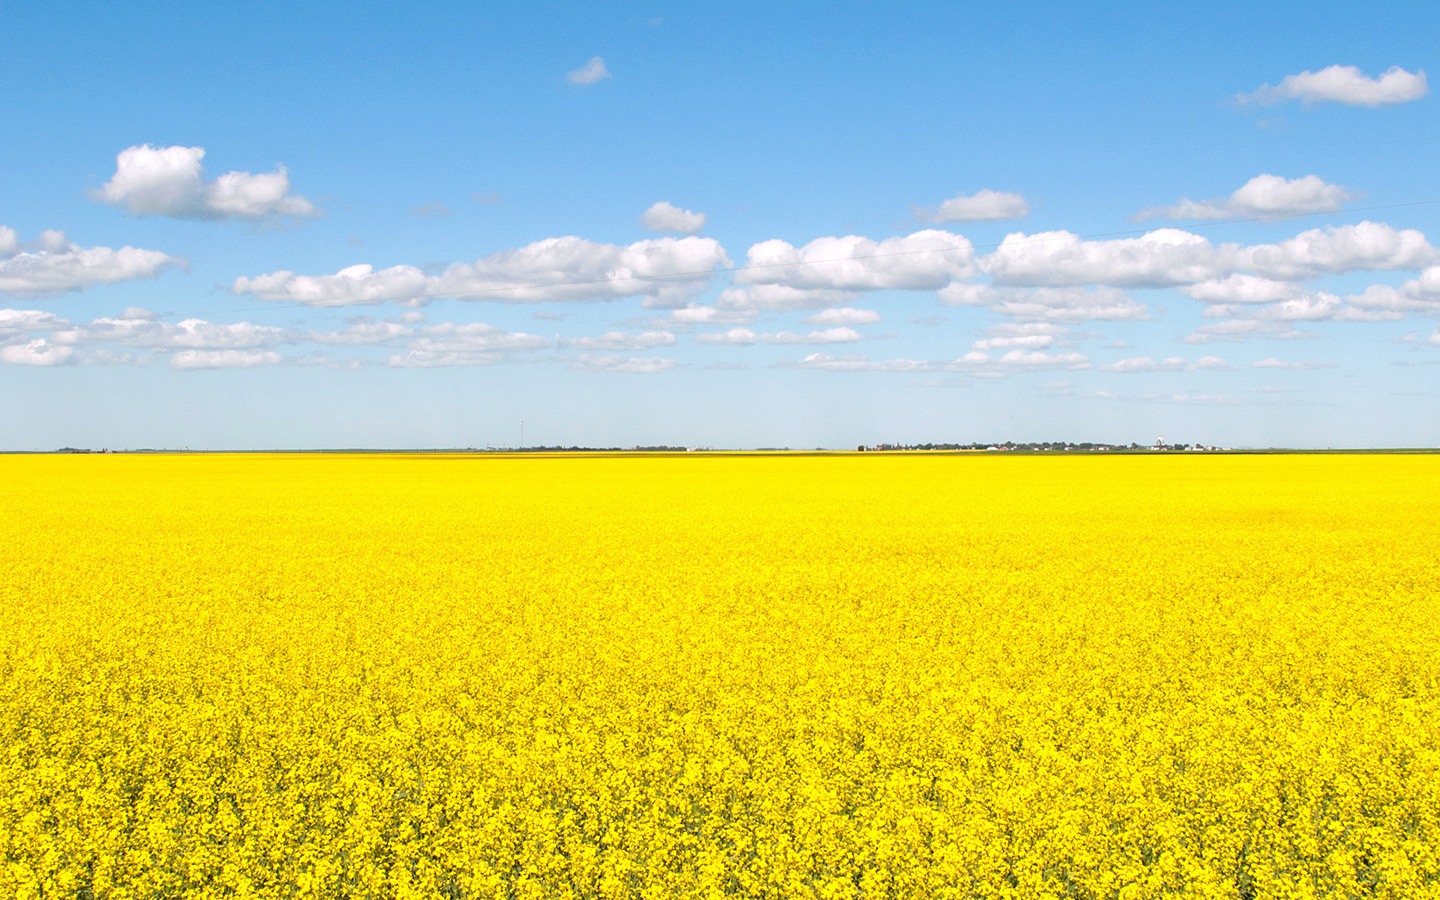 Canola fields on a road trip across the Canadian Prairies